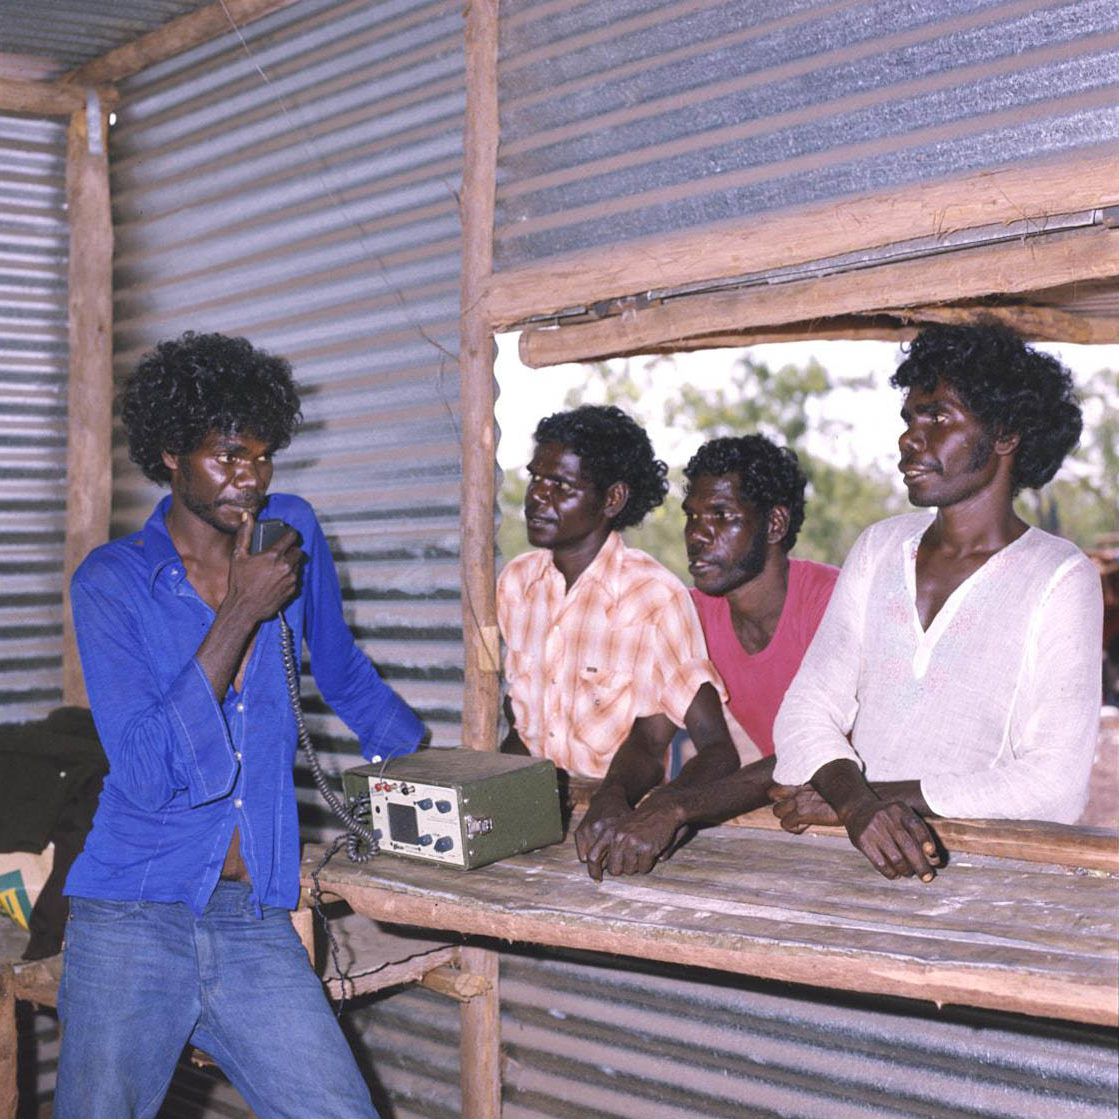 A young Aboriginal man stands talking into a radio in a bush-pole and corrugated iron structure with an open window. Standing outside at the window are three more young Aboriginal men, looking at the man inside.